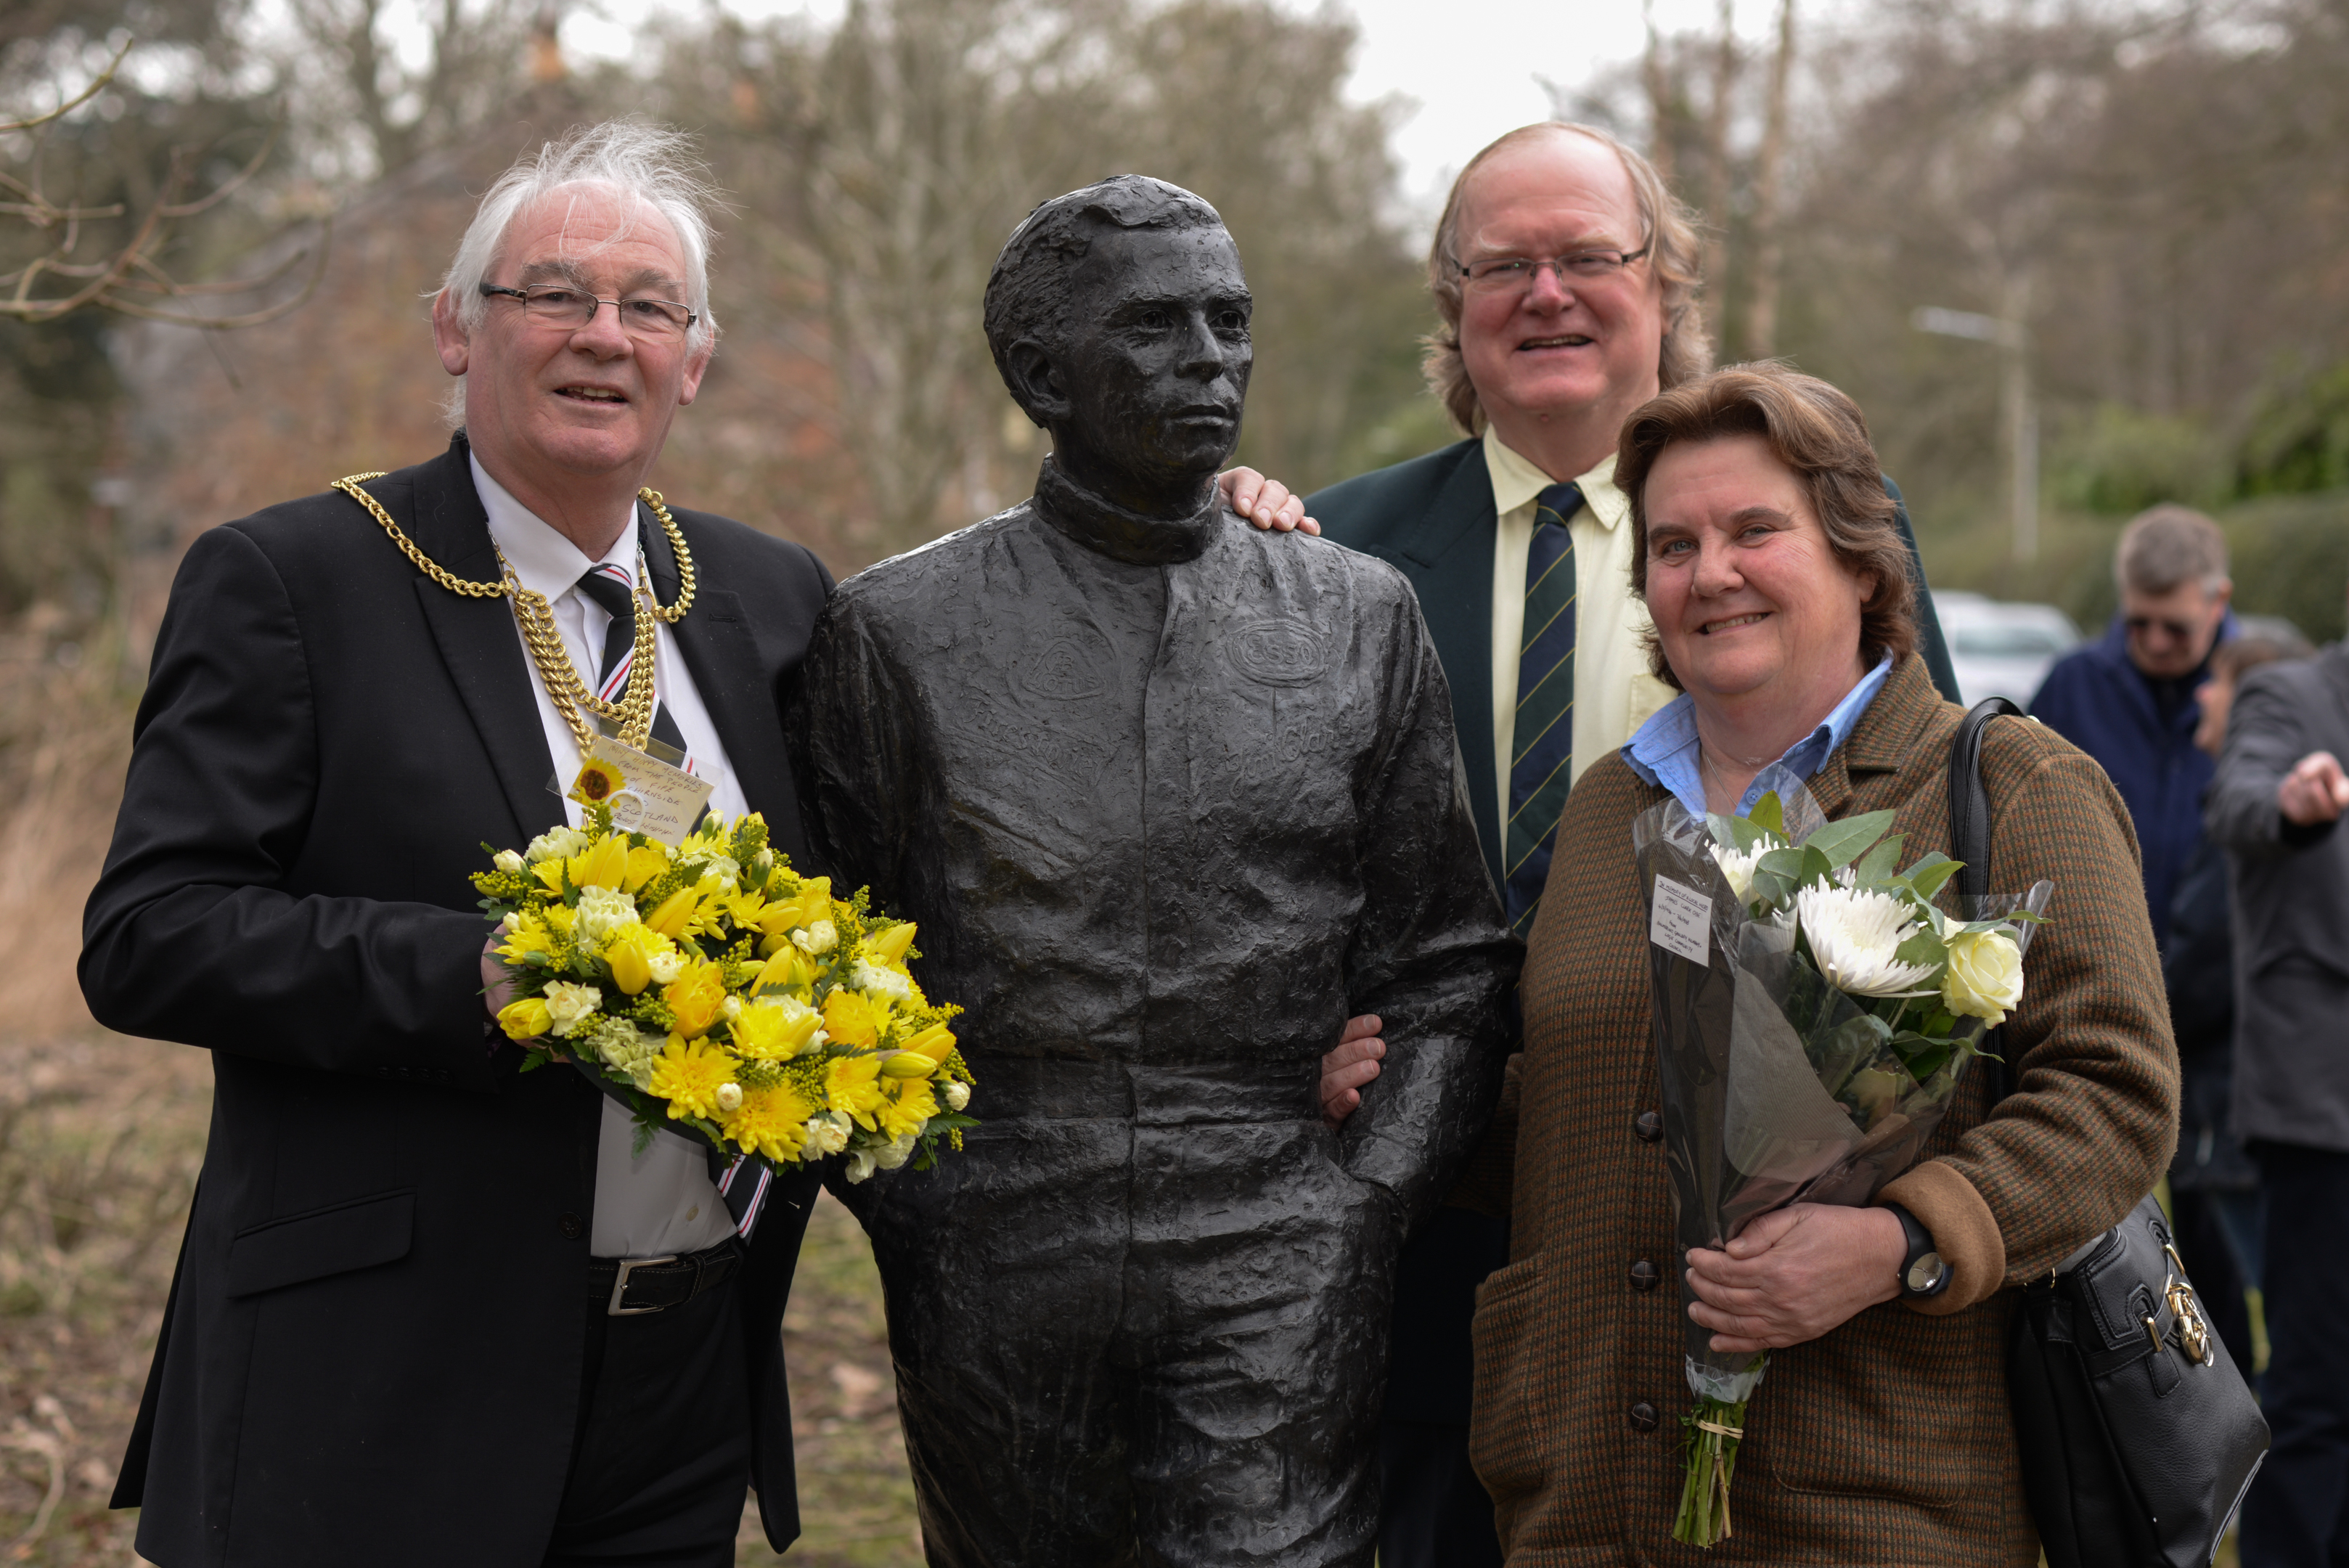 Provost Jim Leishman, Councillor Andy Heer and Eleanor Fleming, chair of the local Community Council, at the Jim Clark memorial, Kilmany.